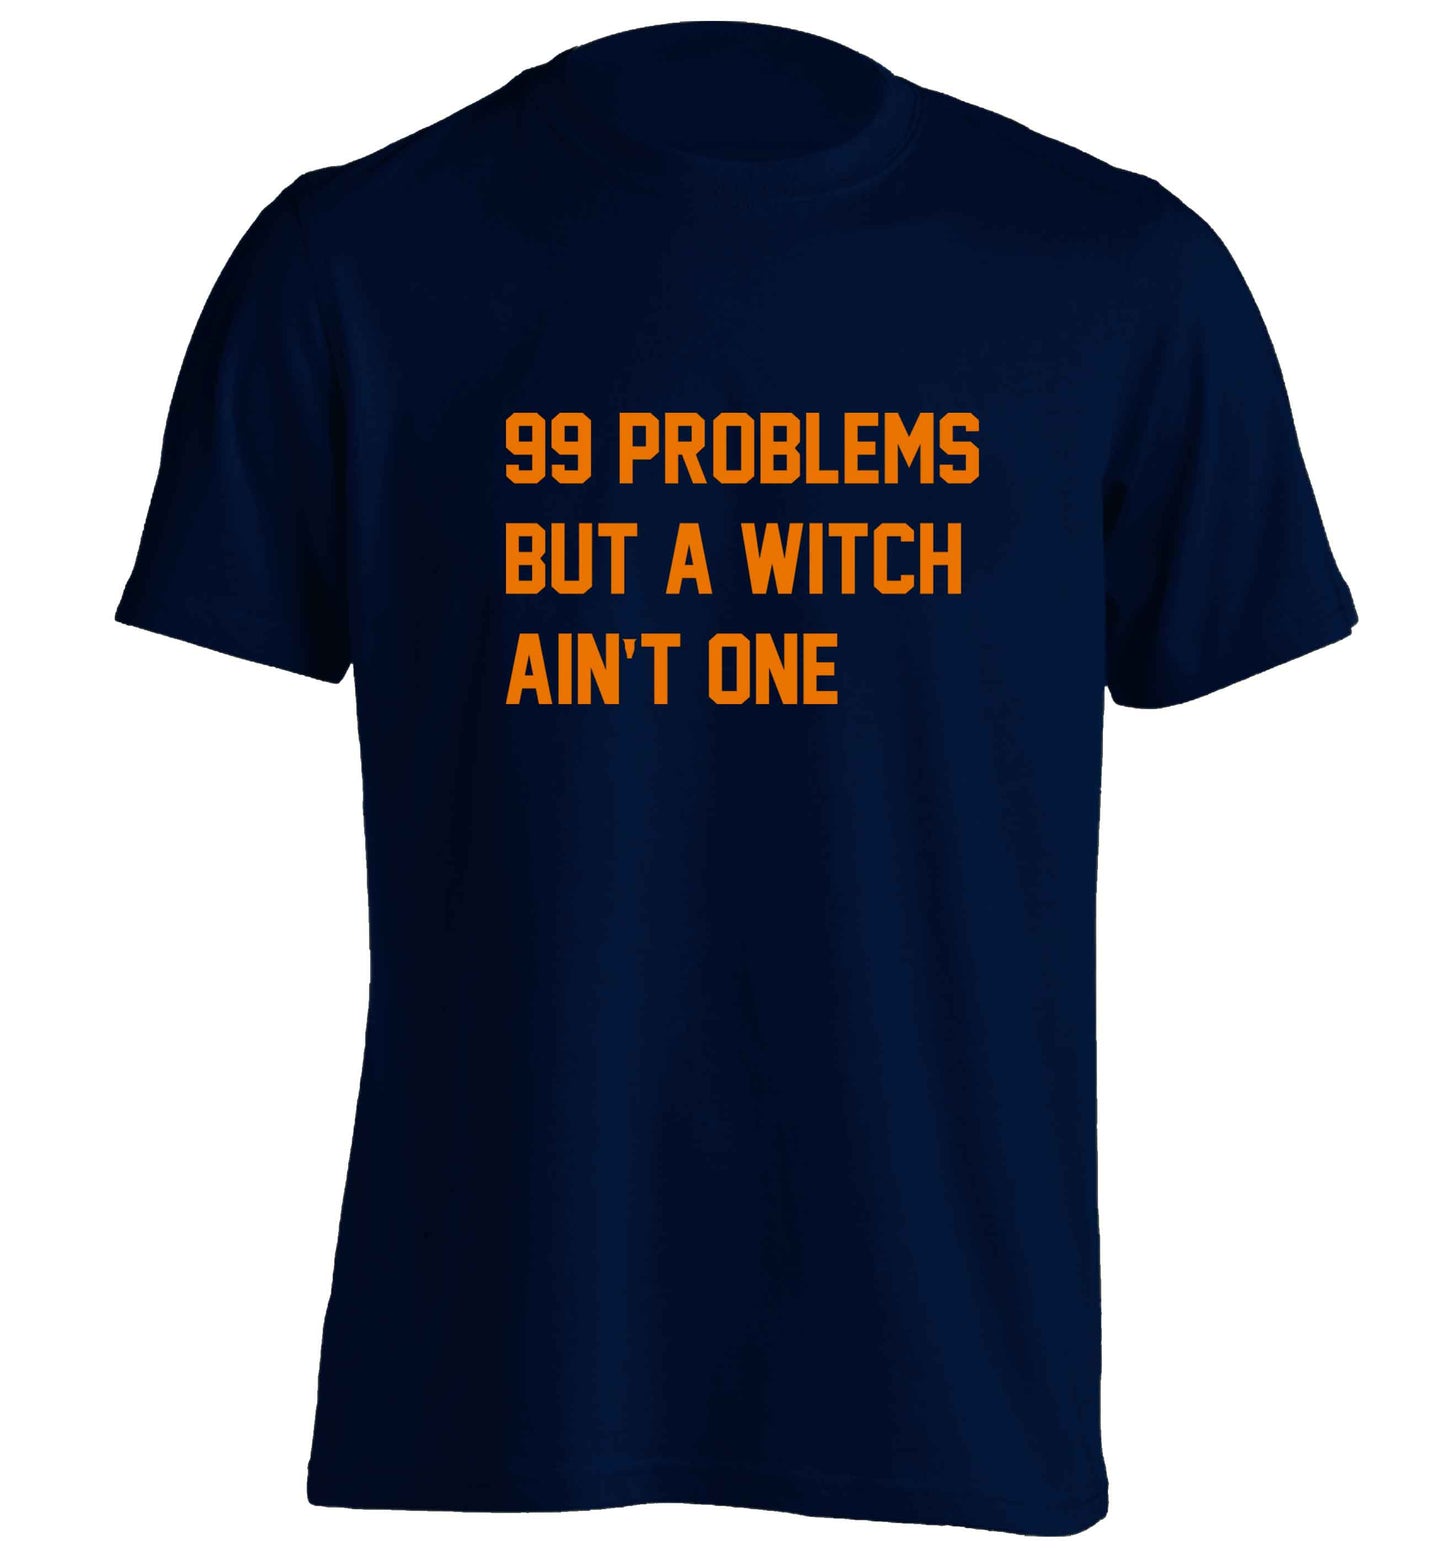 99 Problems but a witch aint one adults unisex navy Tshirt 2XL